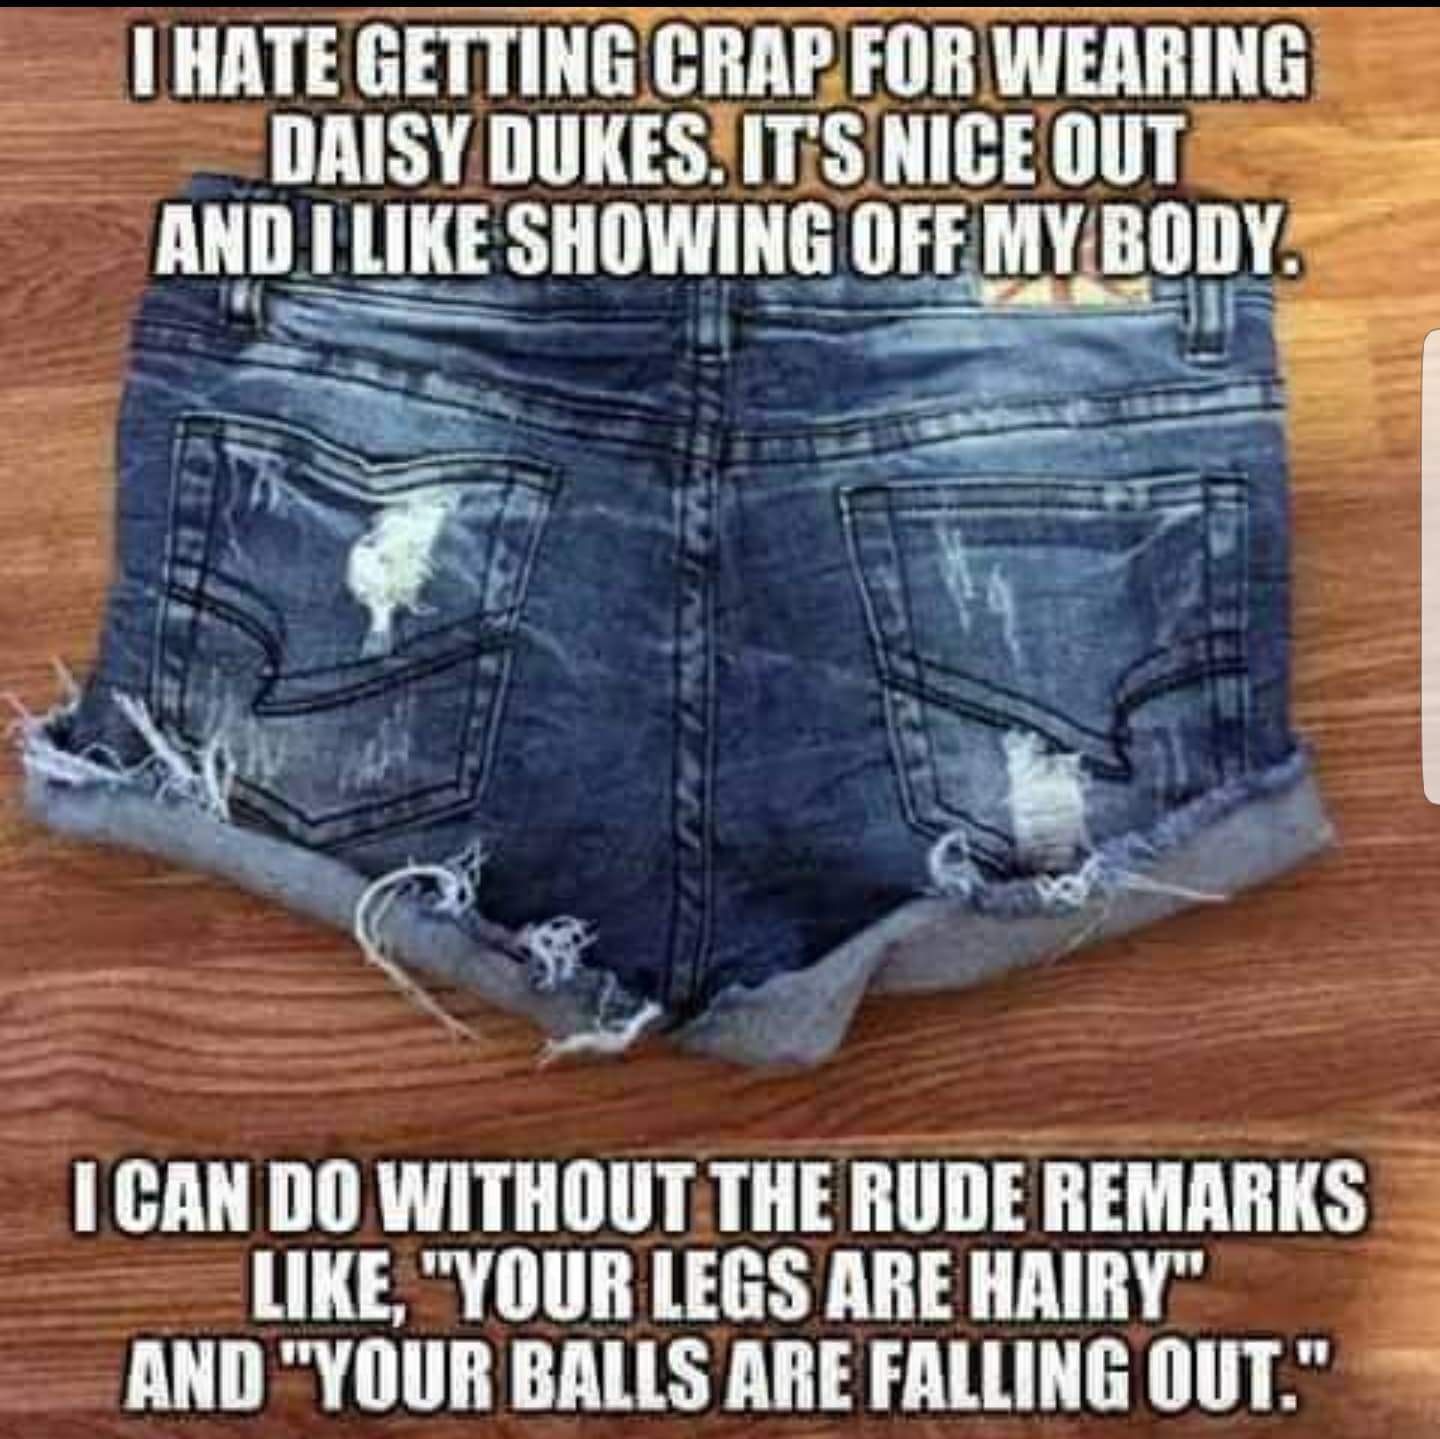 Getting crap for wearing daisy dukes